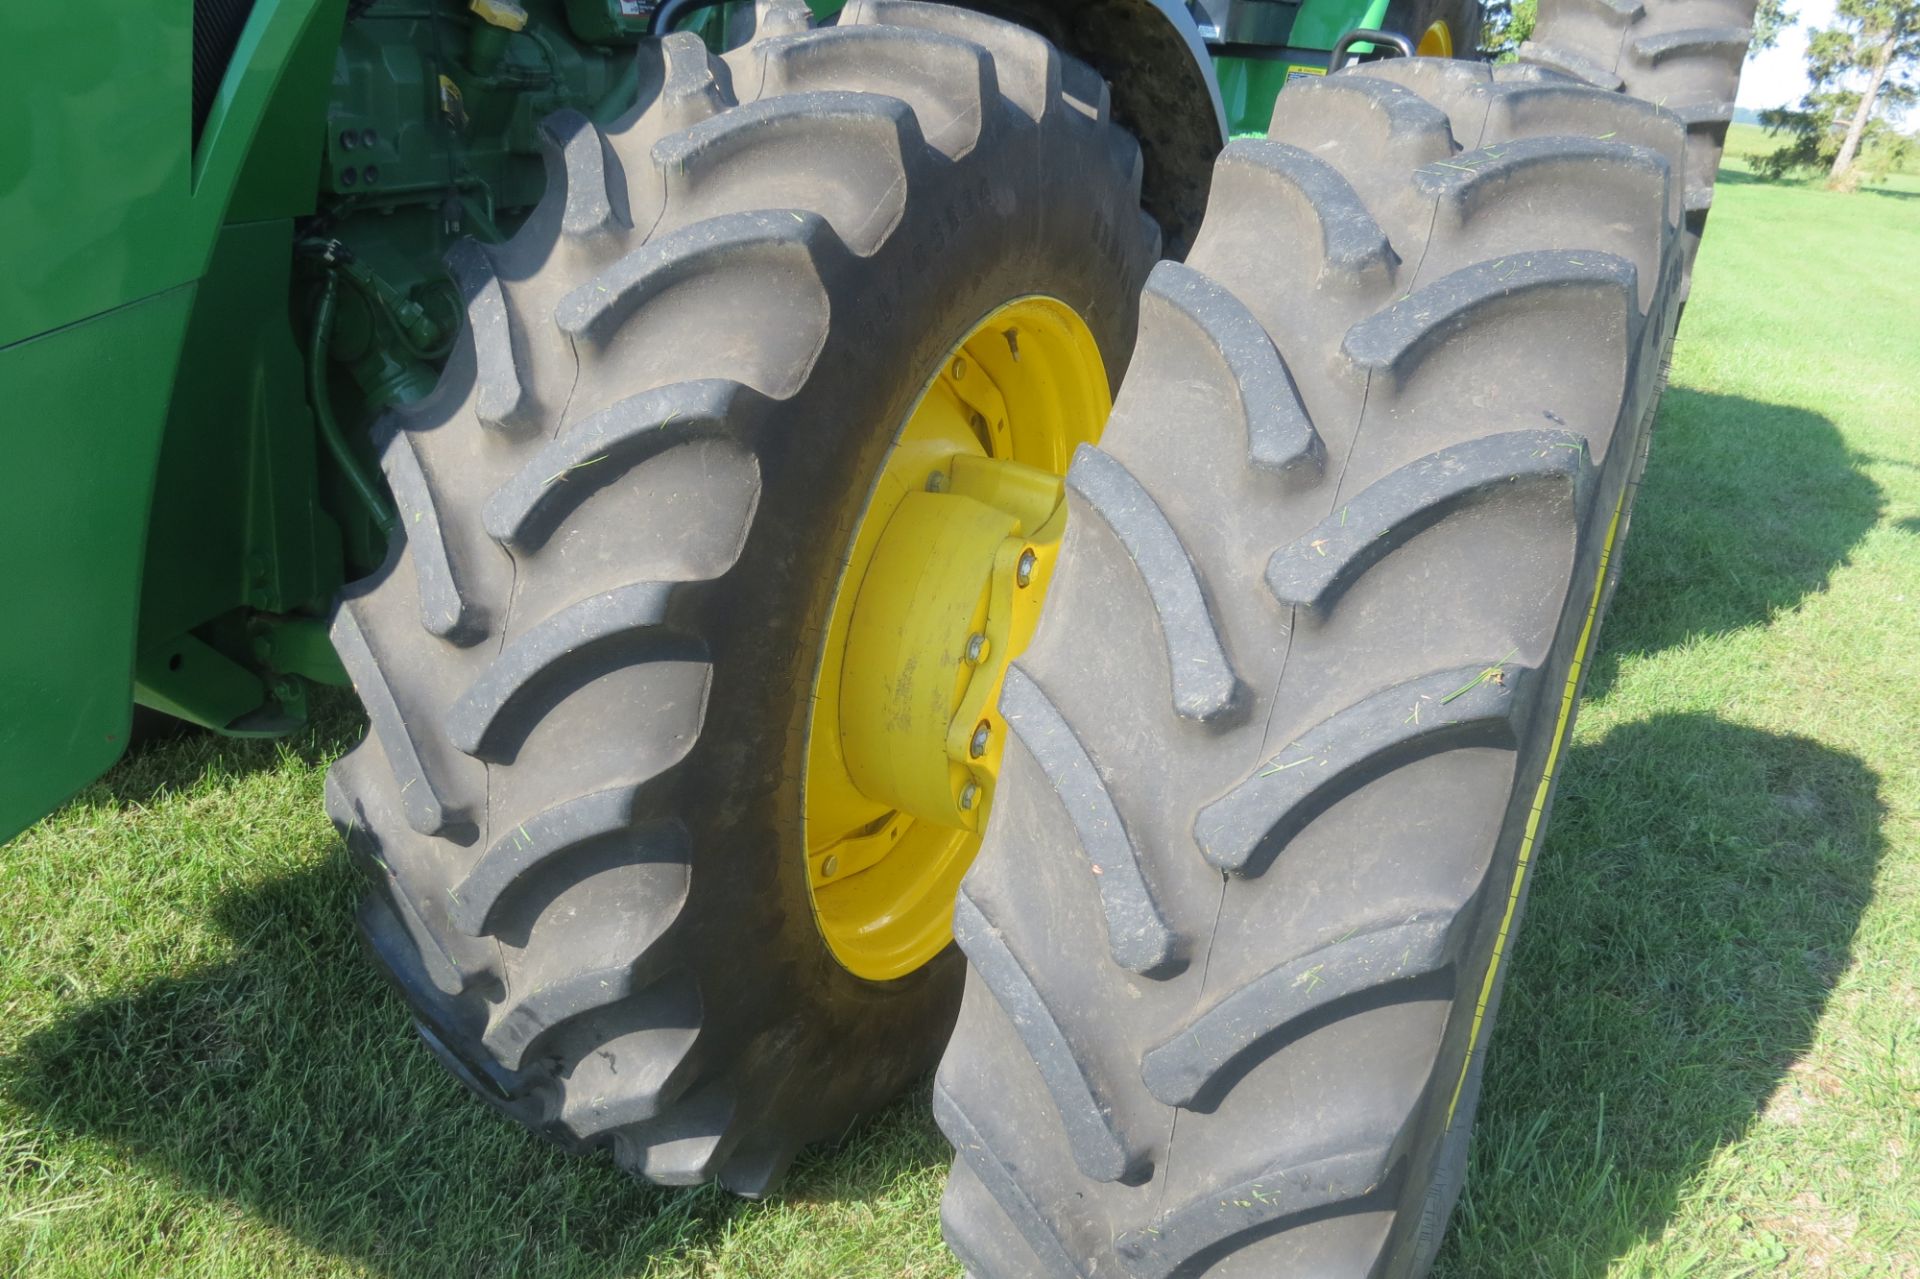 John Deere 8360R MFWD tractor, 480/80R50 rear duals, 420/85 R34 front duals, IVT, ILS, active - Image 30 of 40